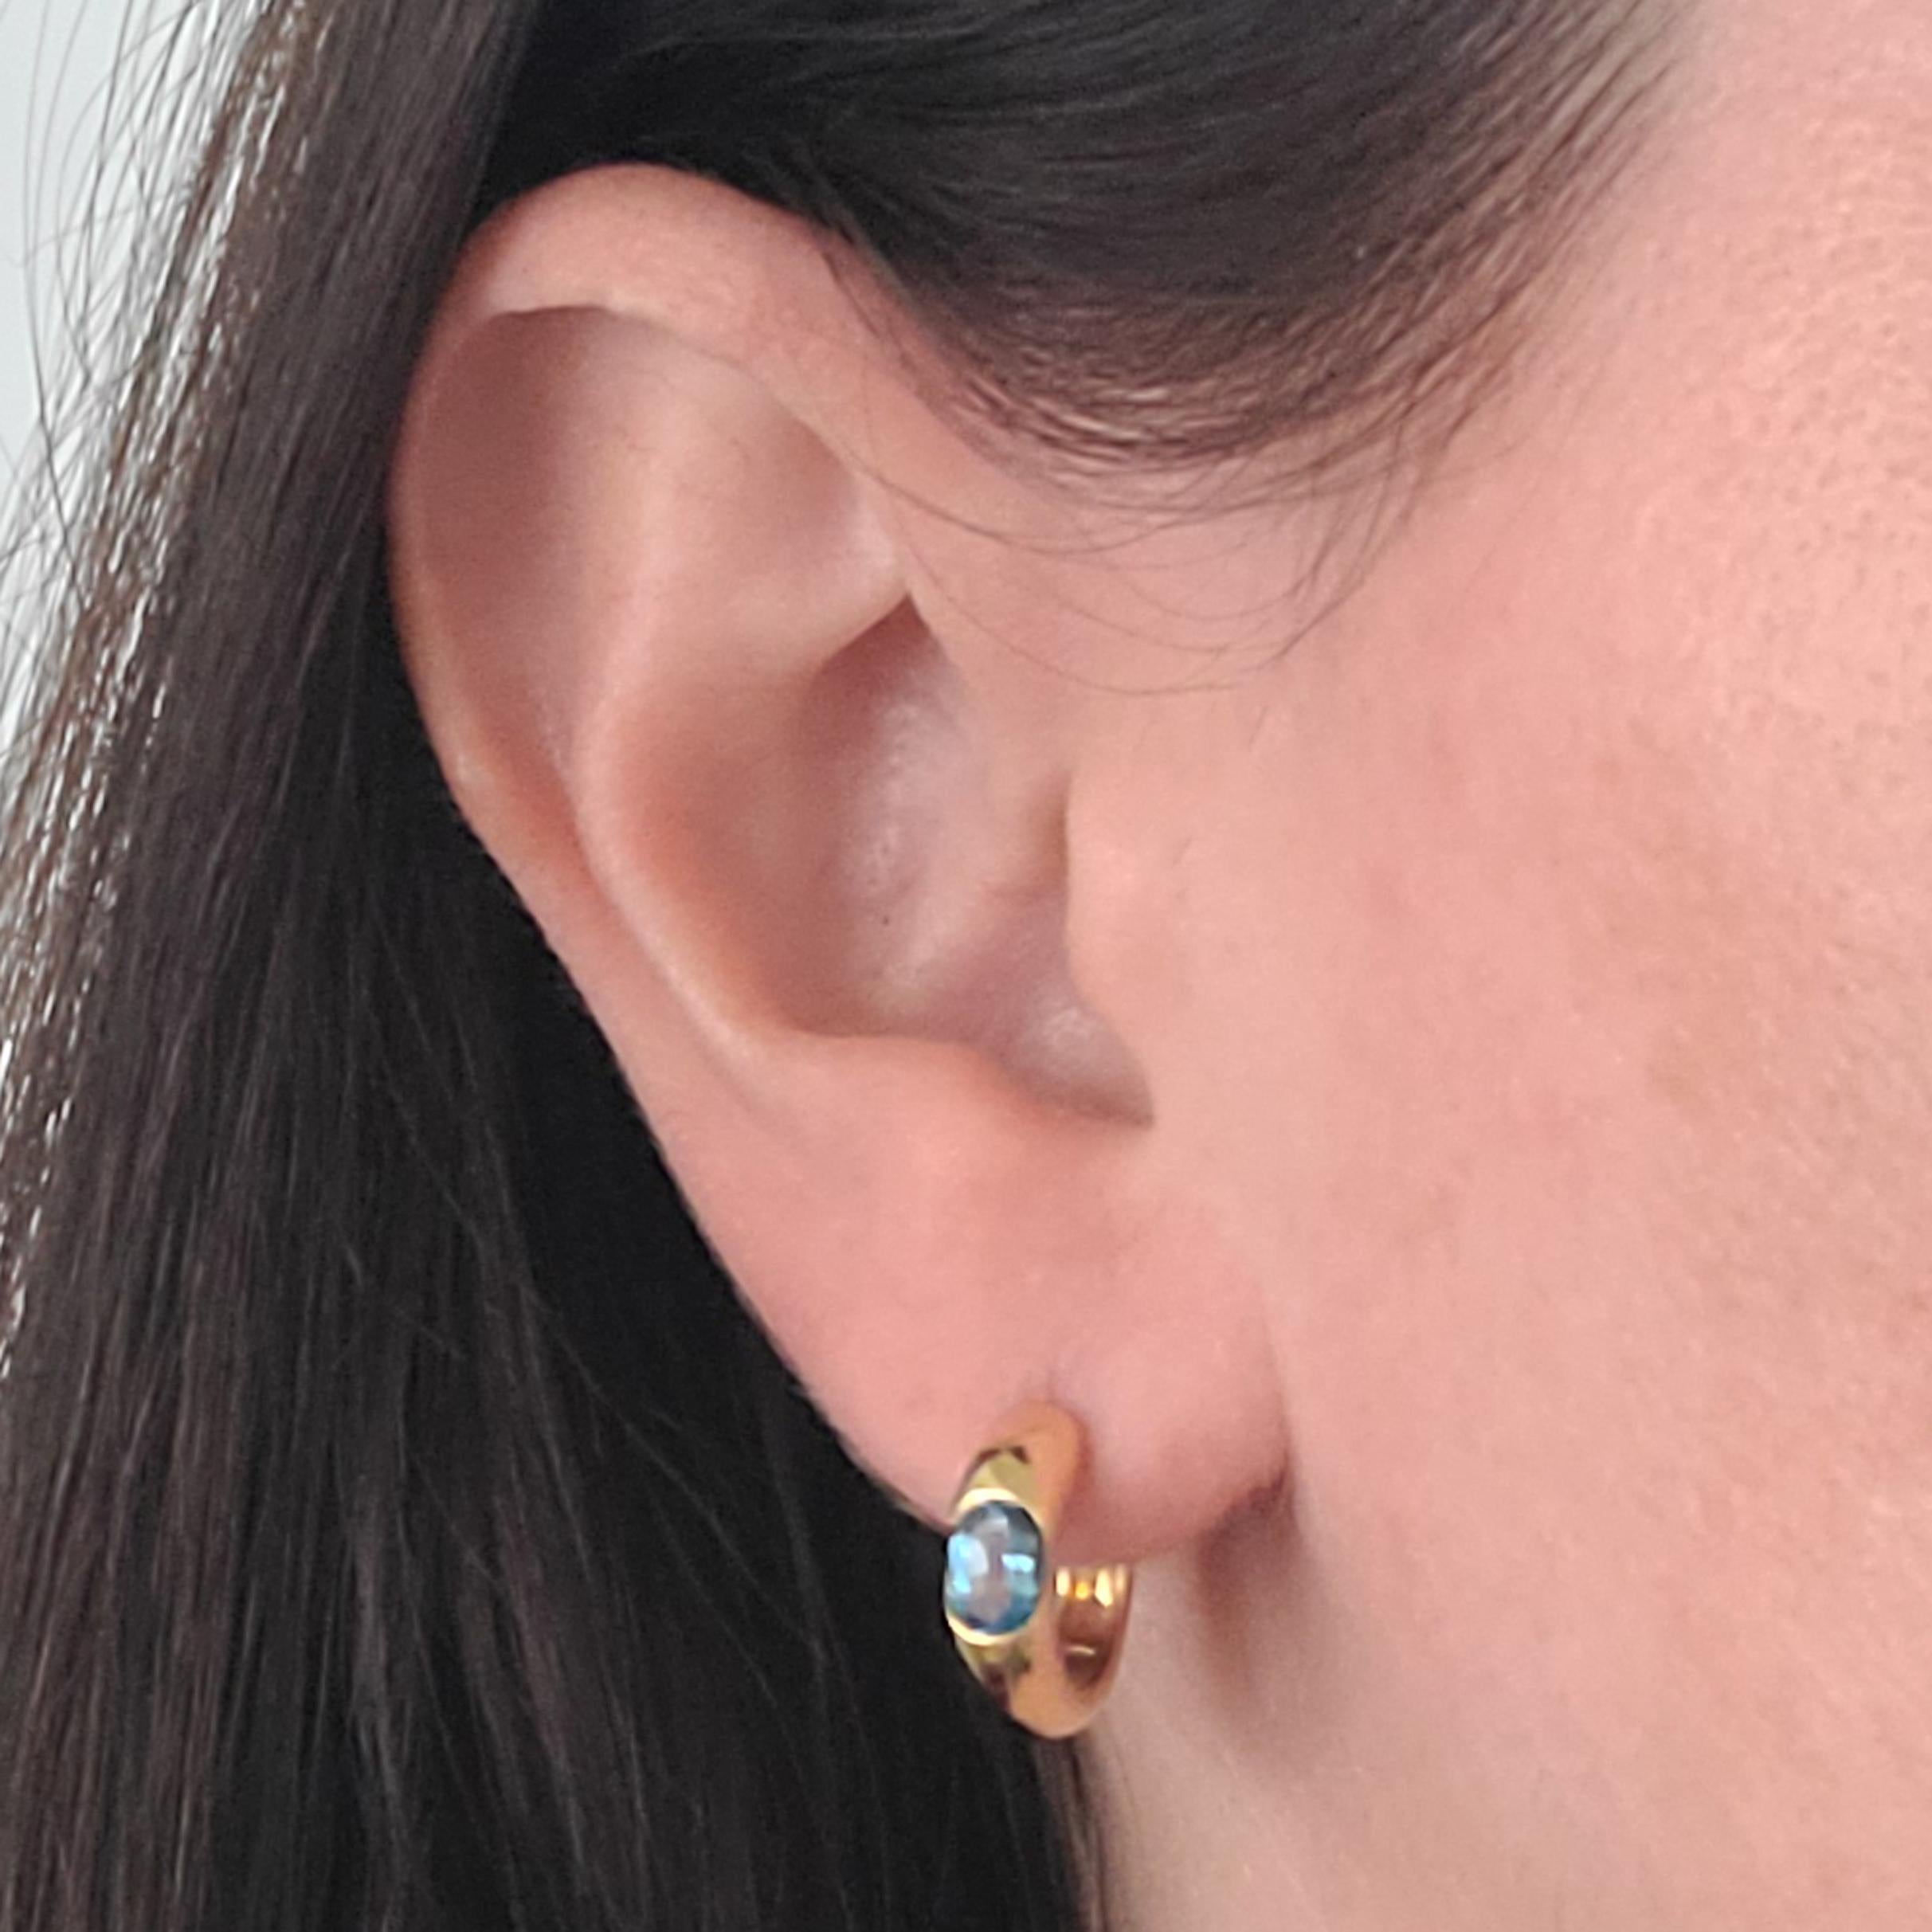 H. Stern 18 Karat Yellow Gold 4.55mm Wide Rounded Huggie Hoop Earrings Featuring 2 Oval Cut Blue Topaz. 15mm Diameter. Pierced Post With Hinge Closure. Finished Weight Is 4.8 Grams.